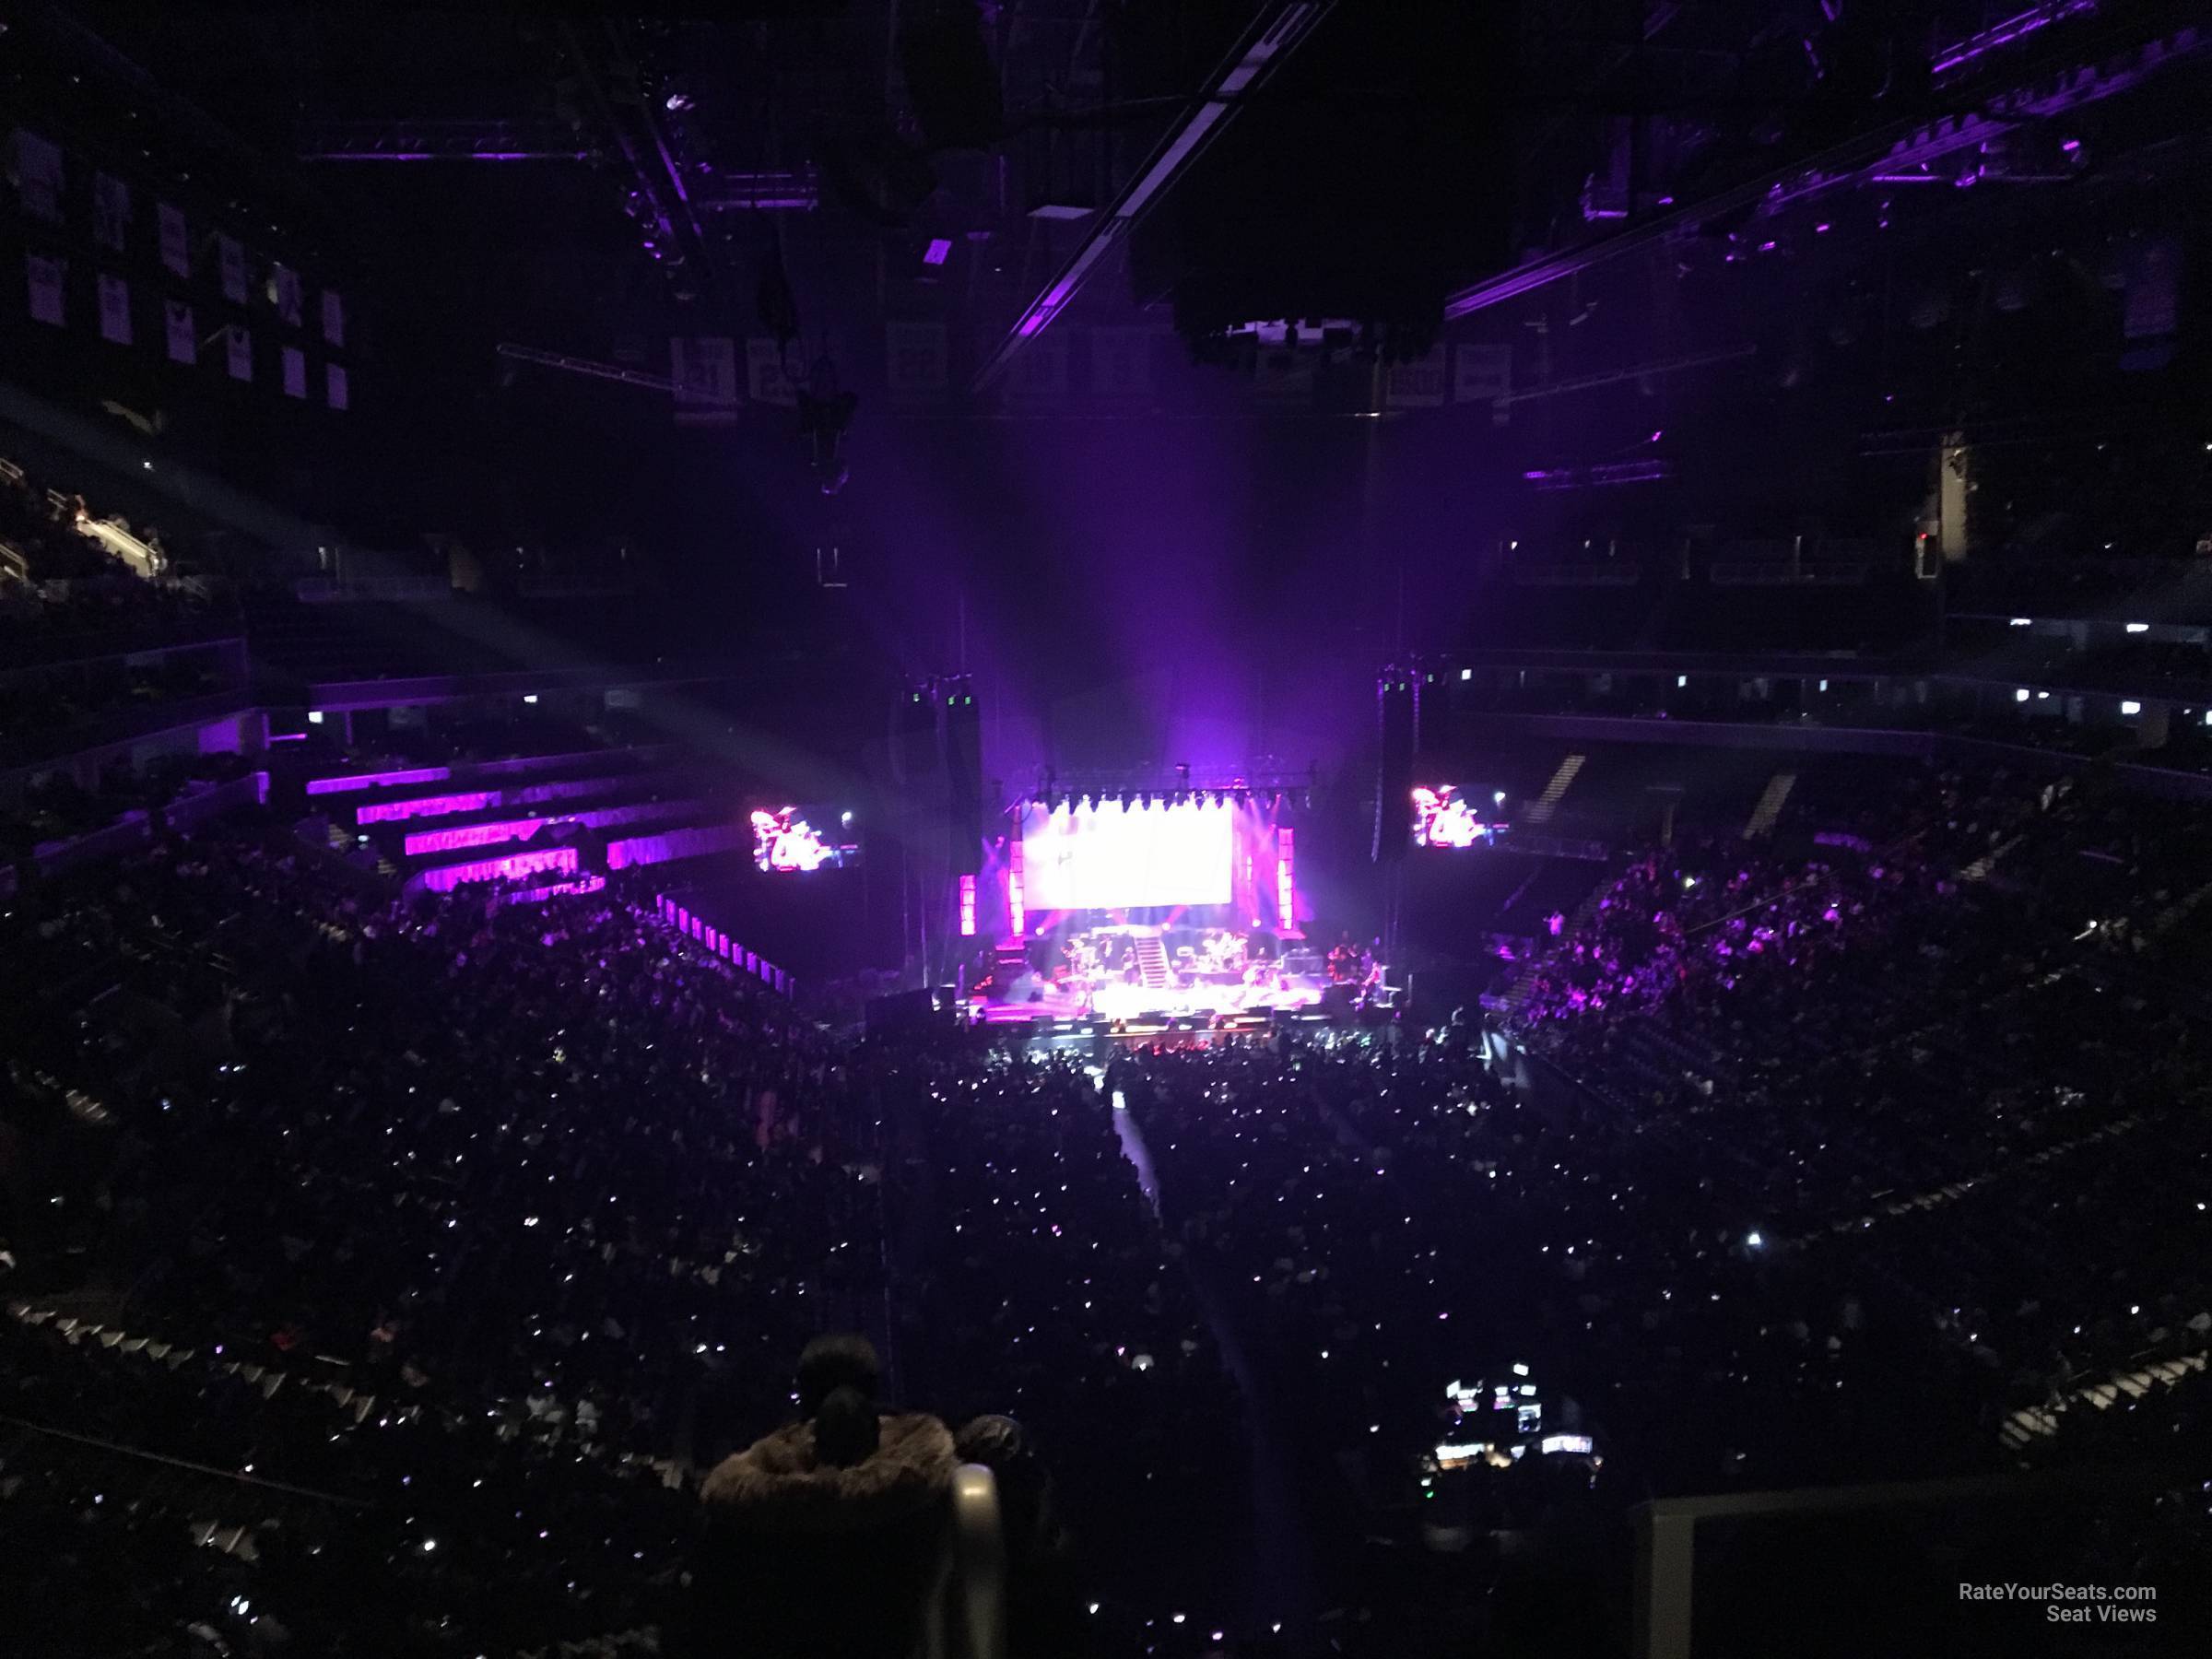 section 218, row 8 seat view  for concert - barclays center